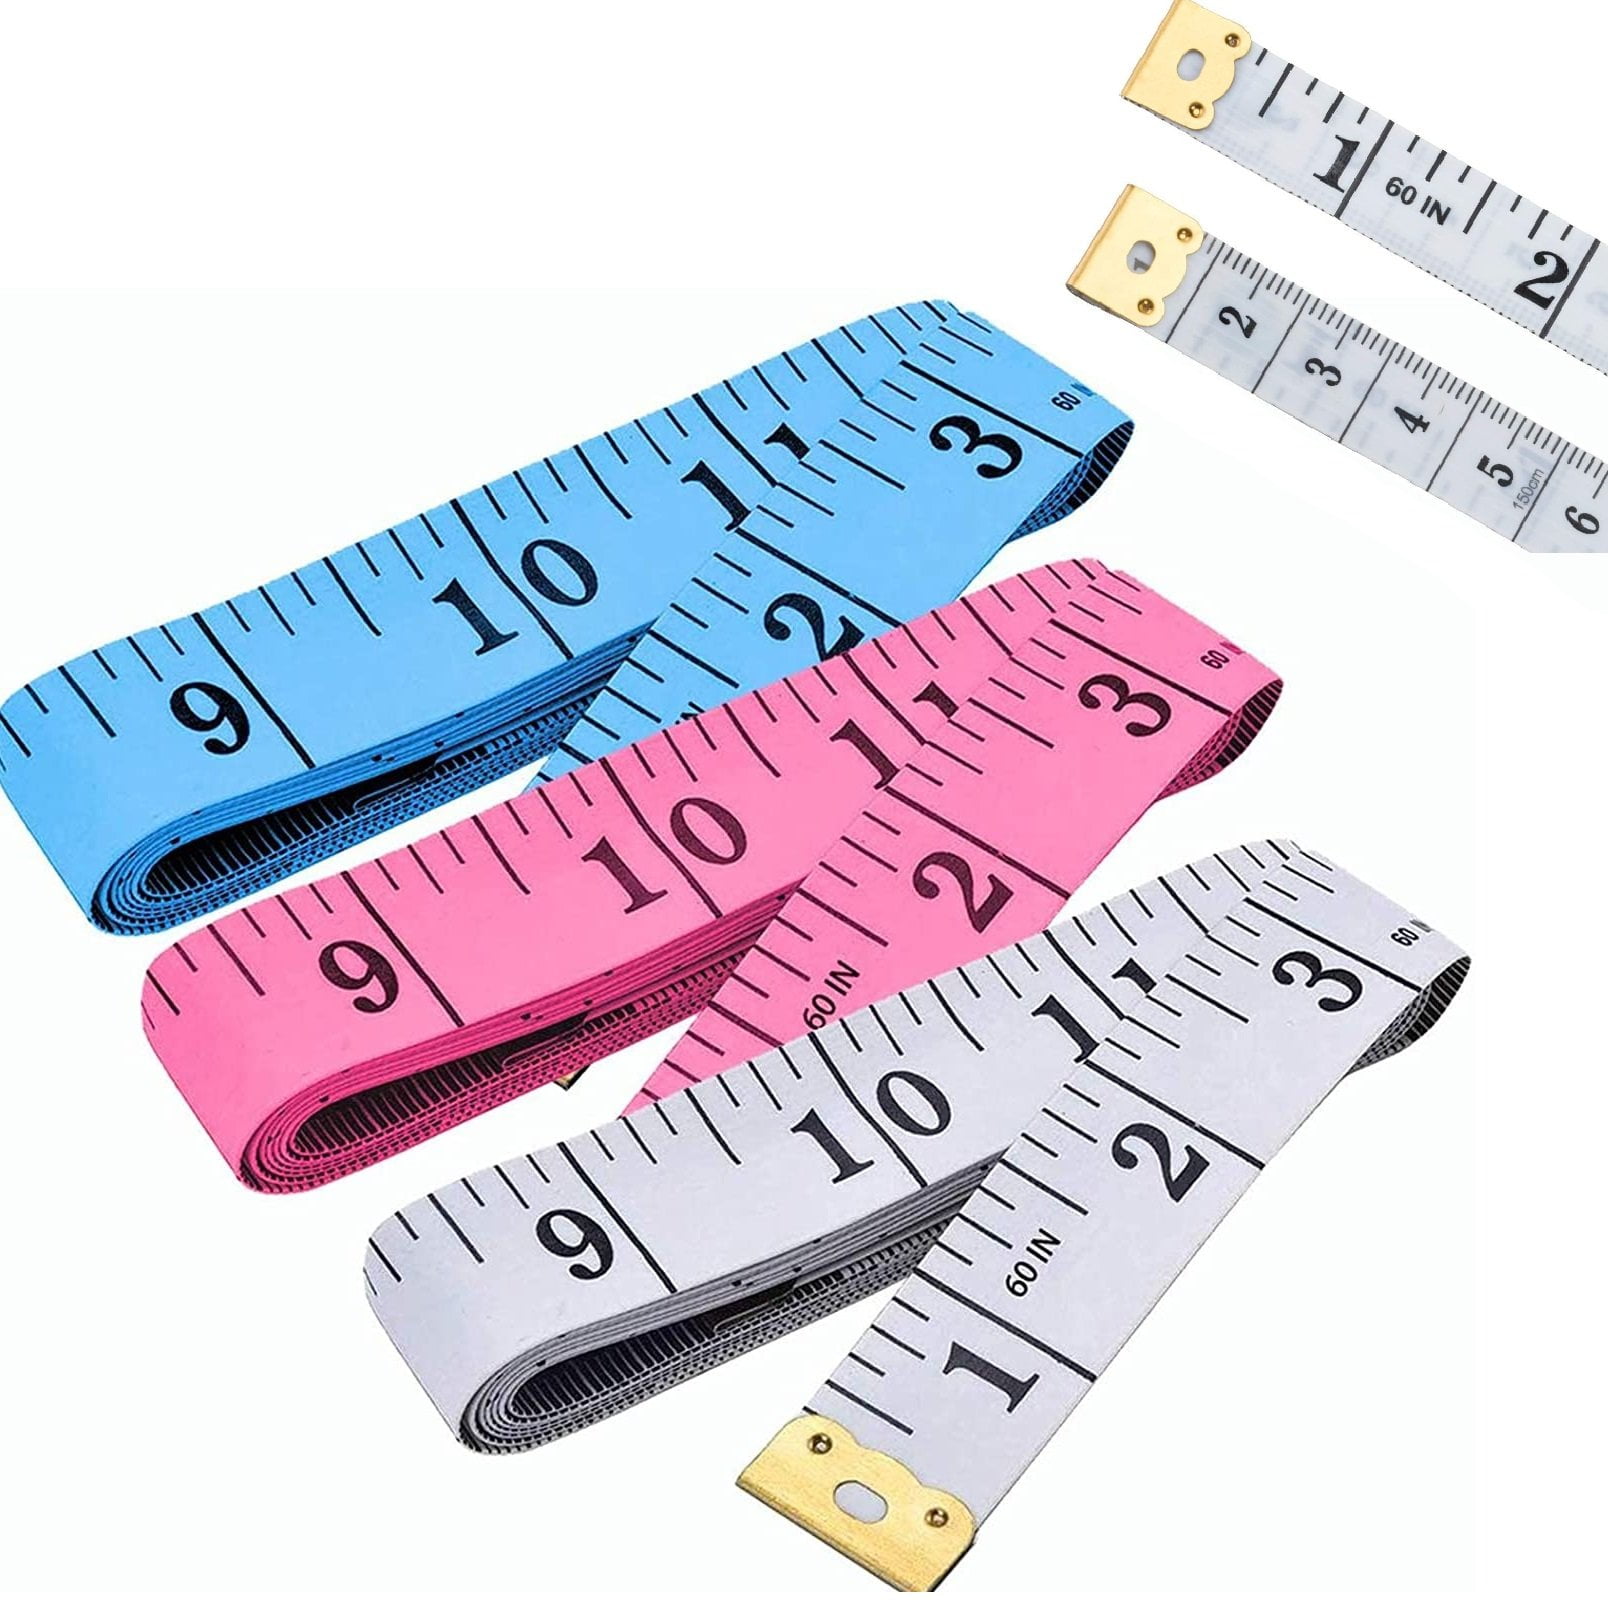 Fabric Measuring Tape Holder  Roll up your sewing tape measure with e